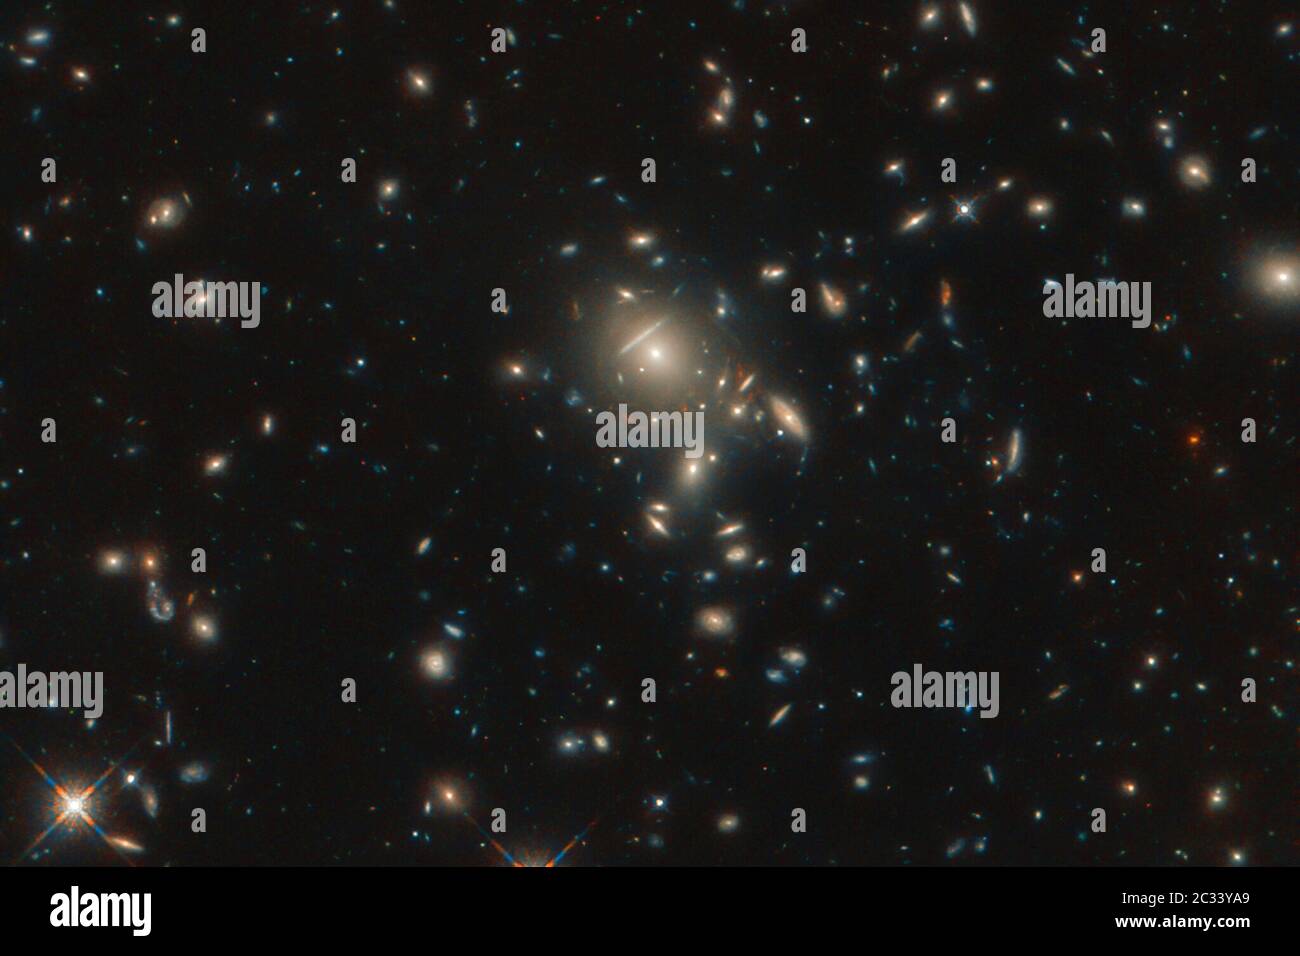 Seen in incredible detail, thanks to the NASA/ESA Hubble Space Telescope, is the starburst galaxy formally known as PLCK G045.1 61.1. The galaxy appears as multiple reddish dots near the center of the image and is being gravitationally lensed by a cluster of closer galaxies that are also visible in this image. Gravitational lensing occurs when a large distribution of matter, such as a galaxy cluster, sits between Earth and a distant light source. Credit: UPI/Alamy Live News Stock Photo